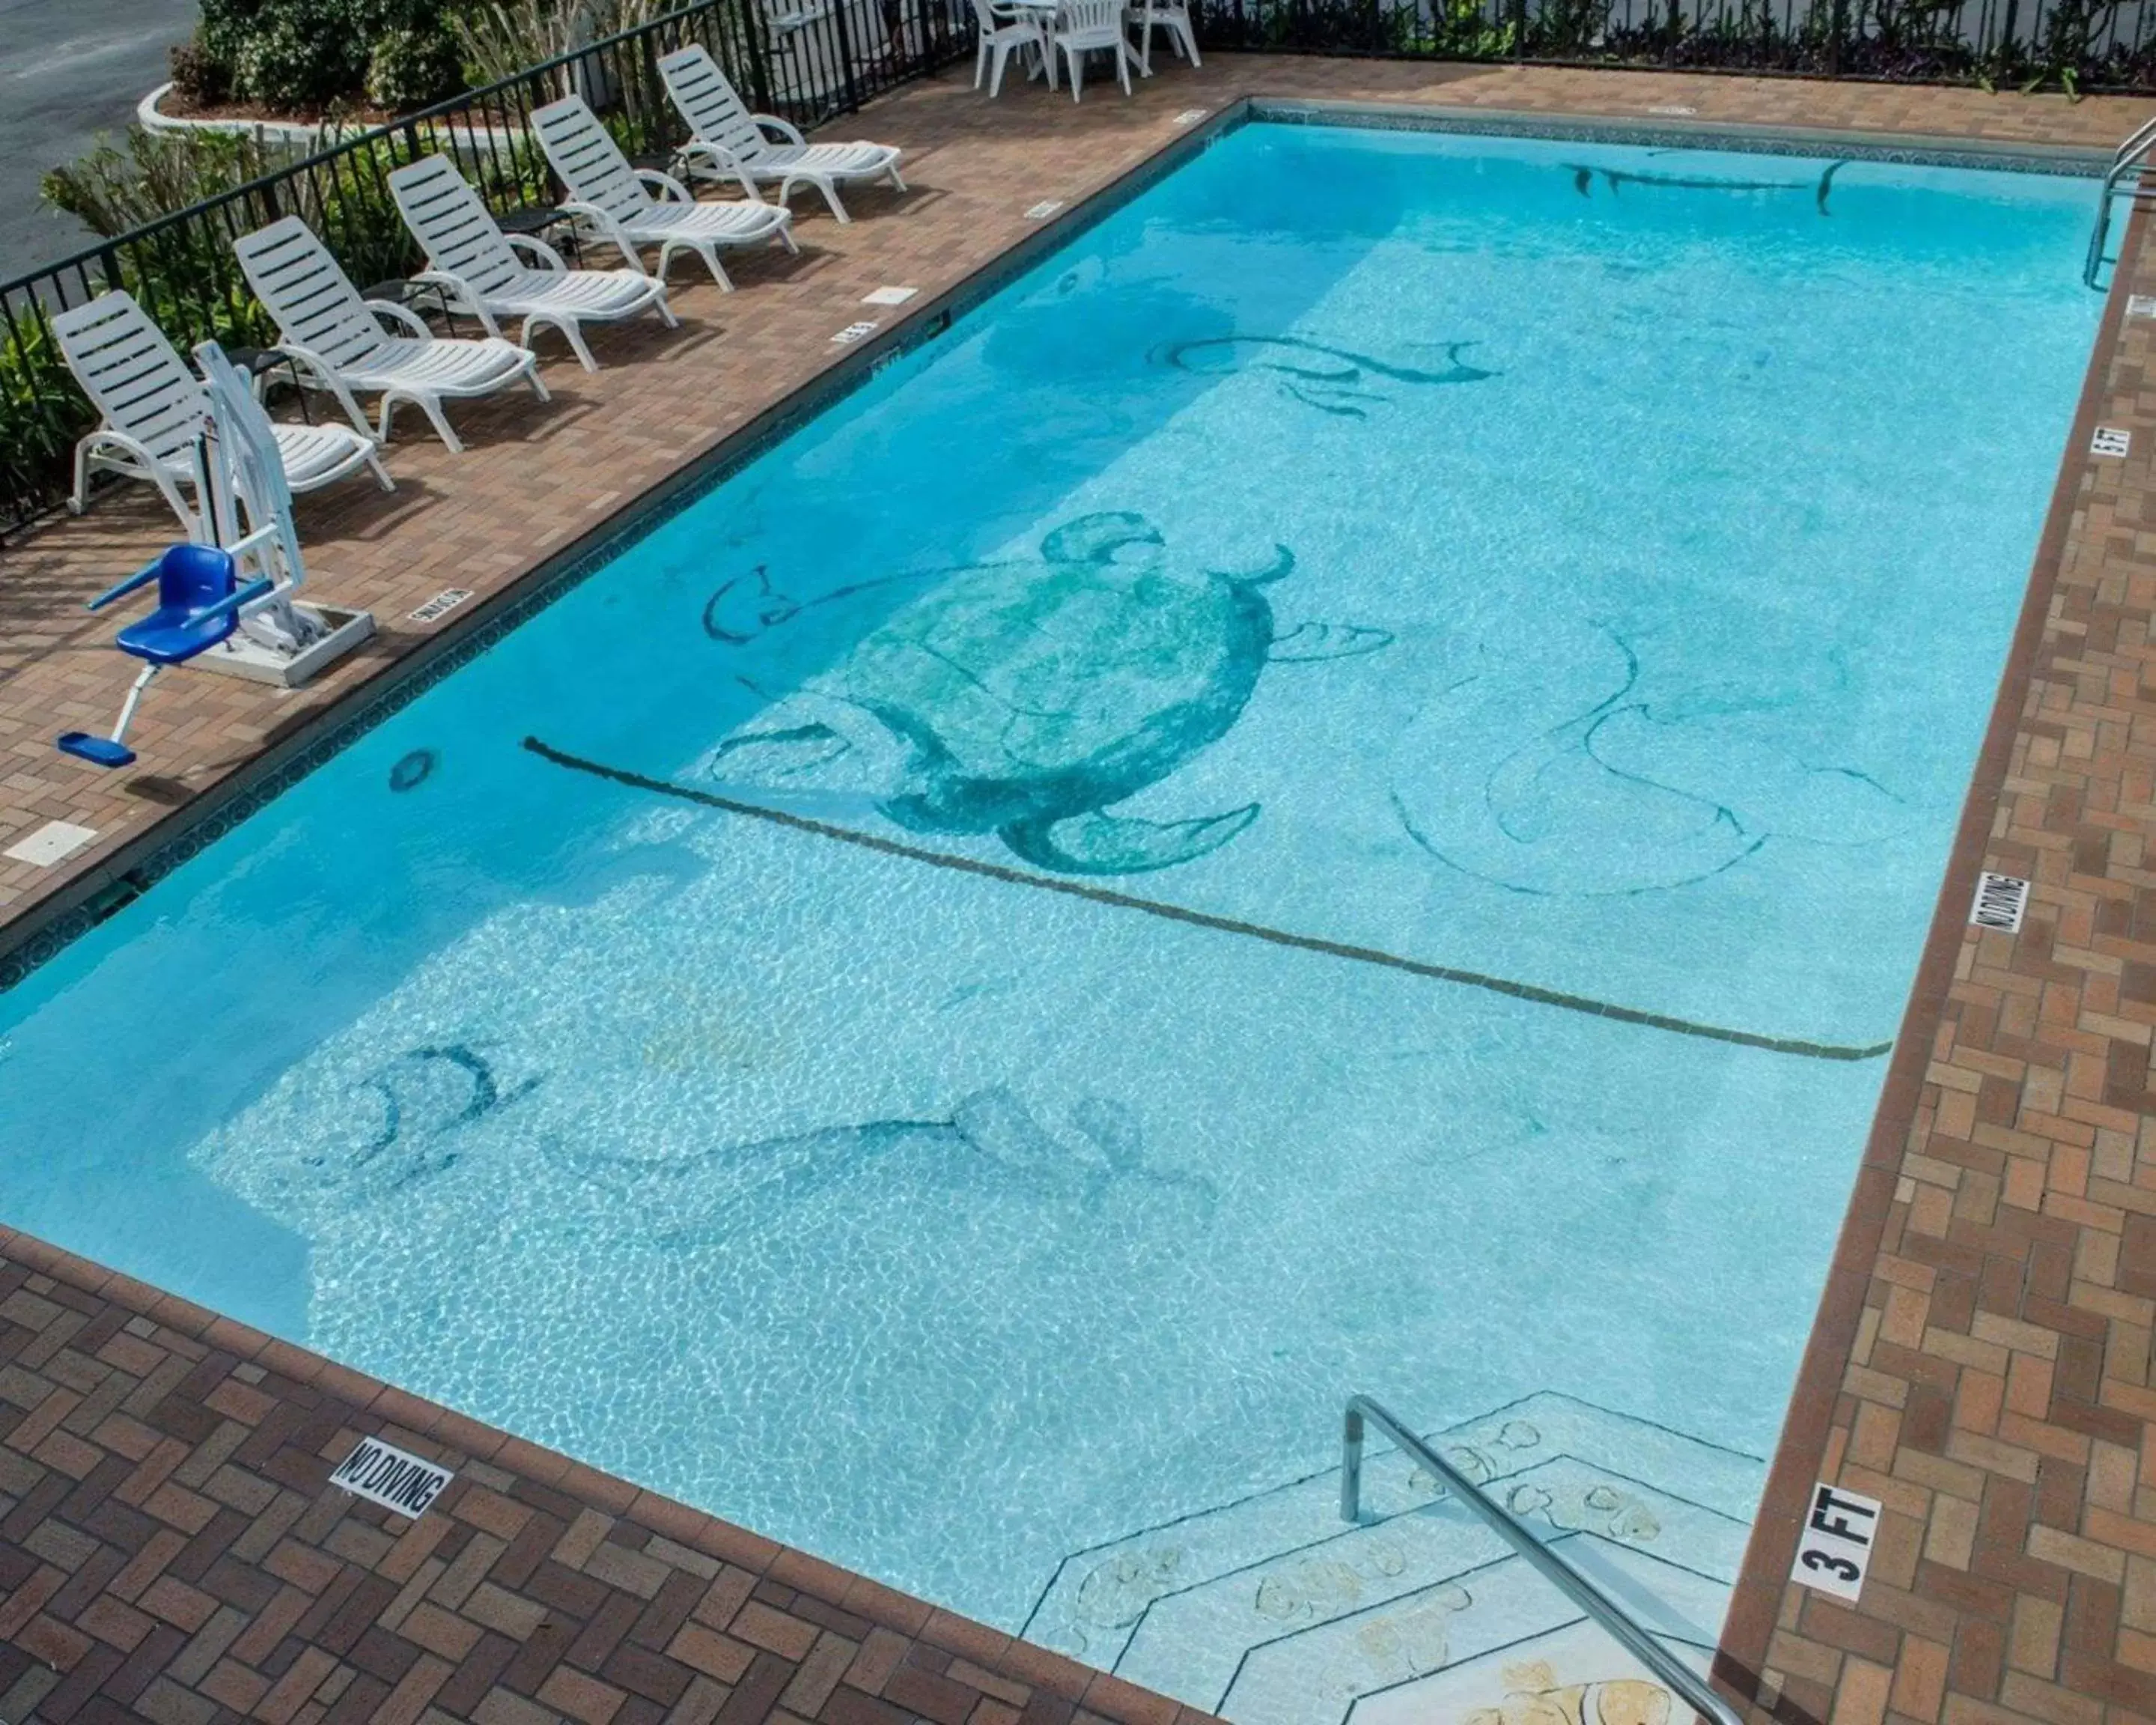 On site, Swimming Pool in Quality Inn near Manatee Springs State Park